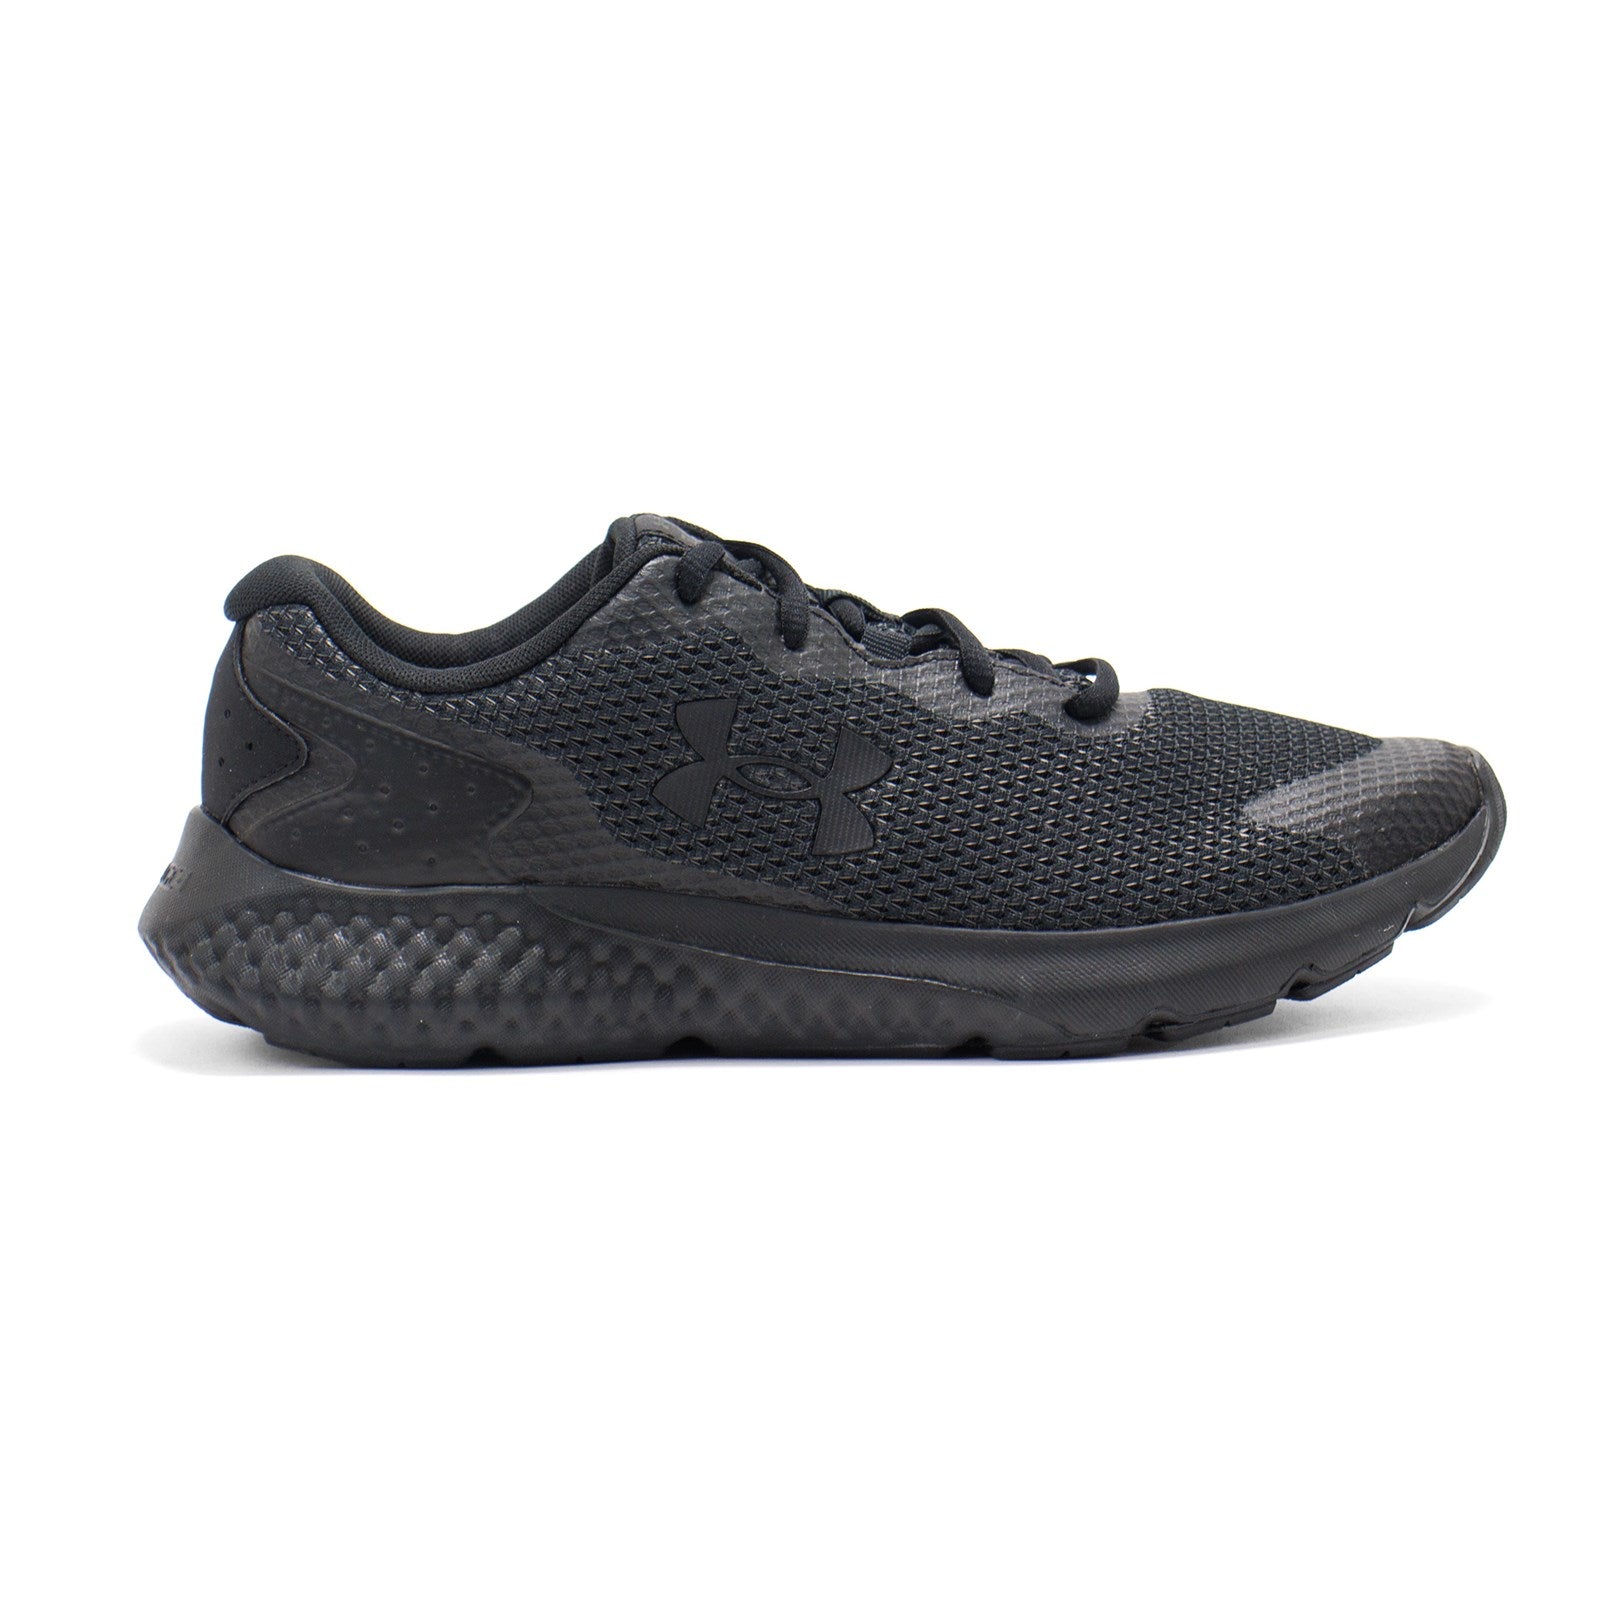 Under Armour Men Charged Rogue 3 Running Shoes